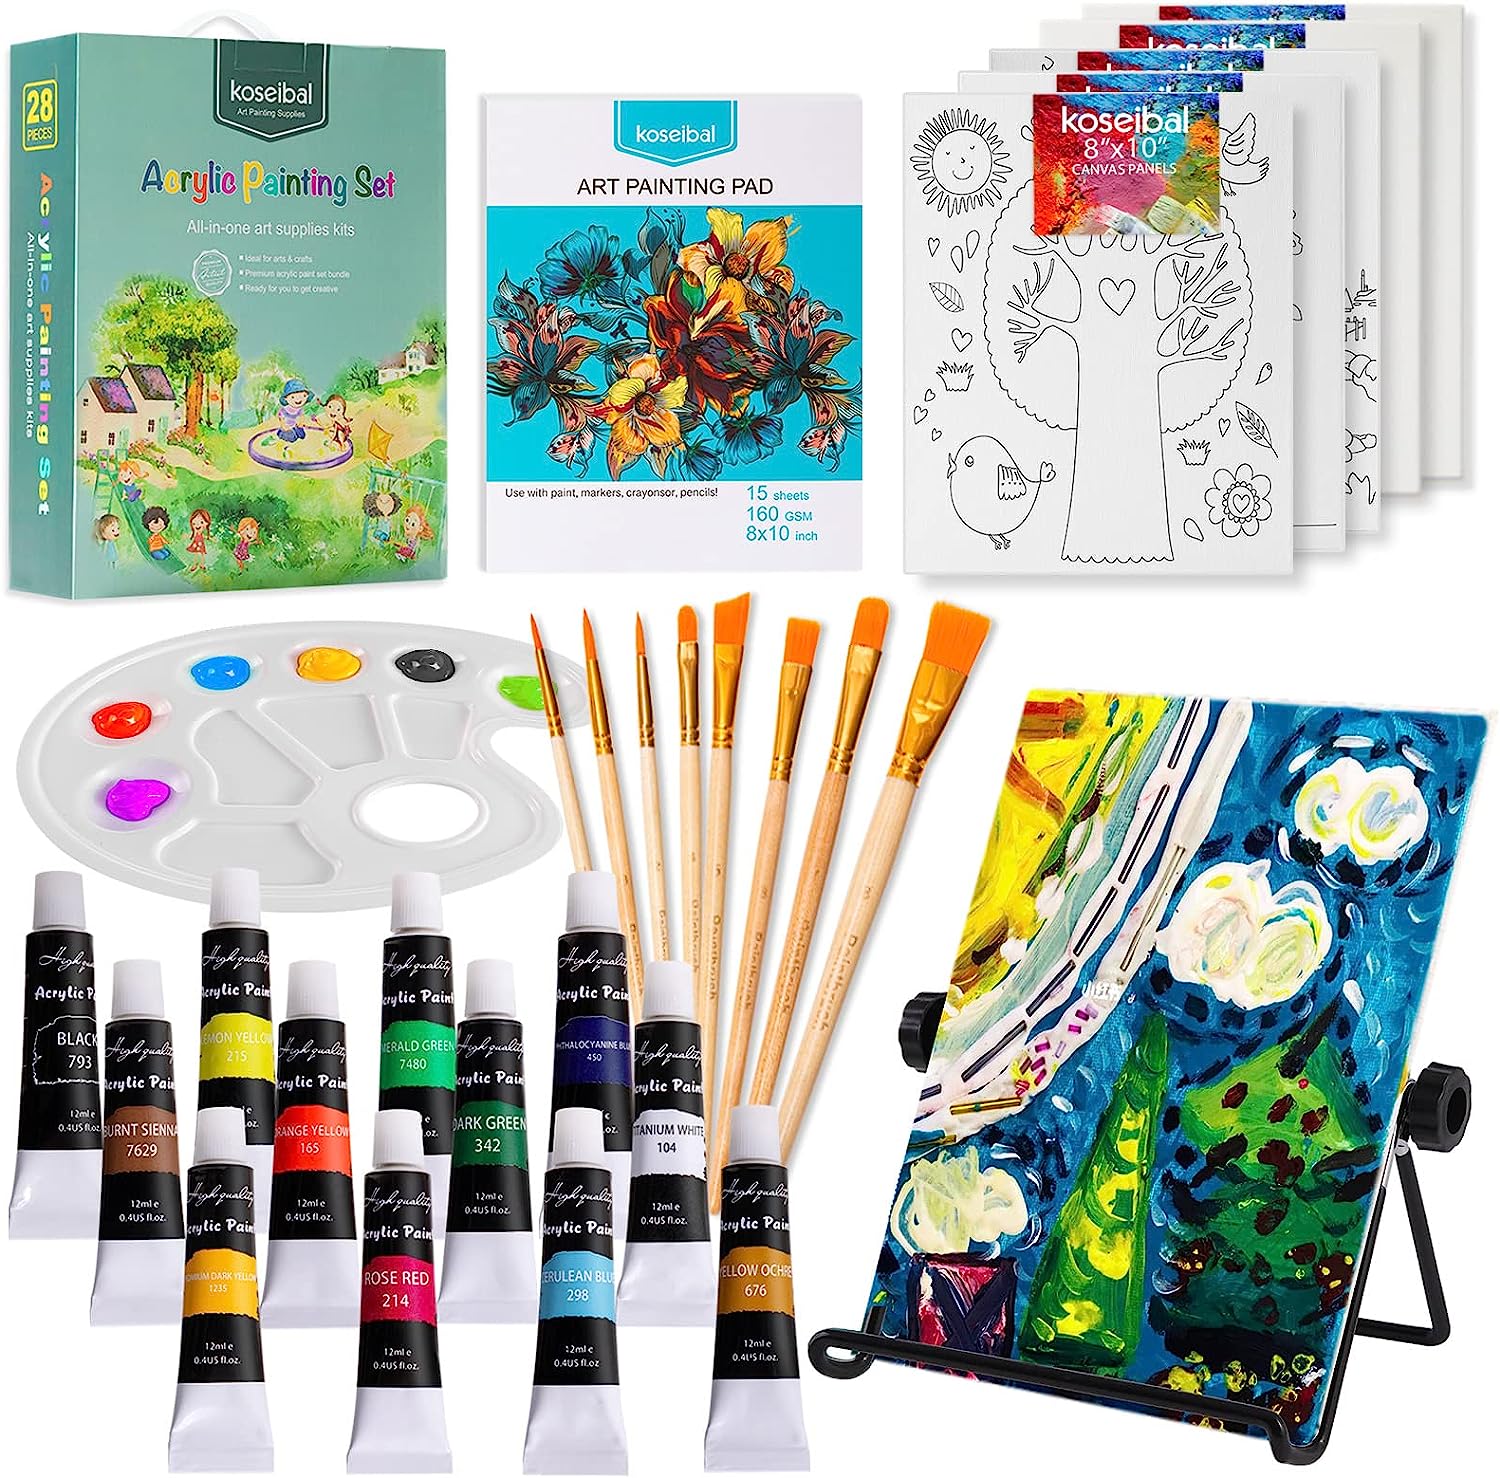 Acrylic Paint Set for Kids, Art Painting Supplies Kit [...]